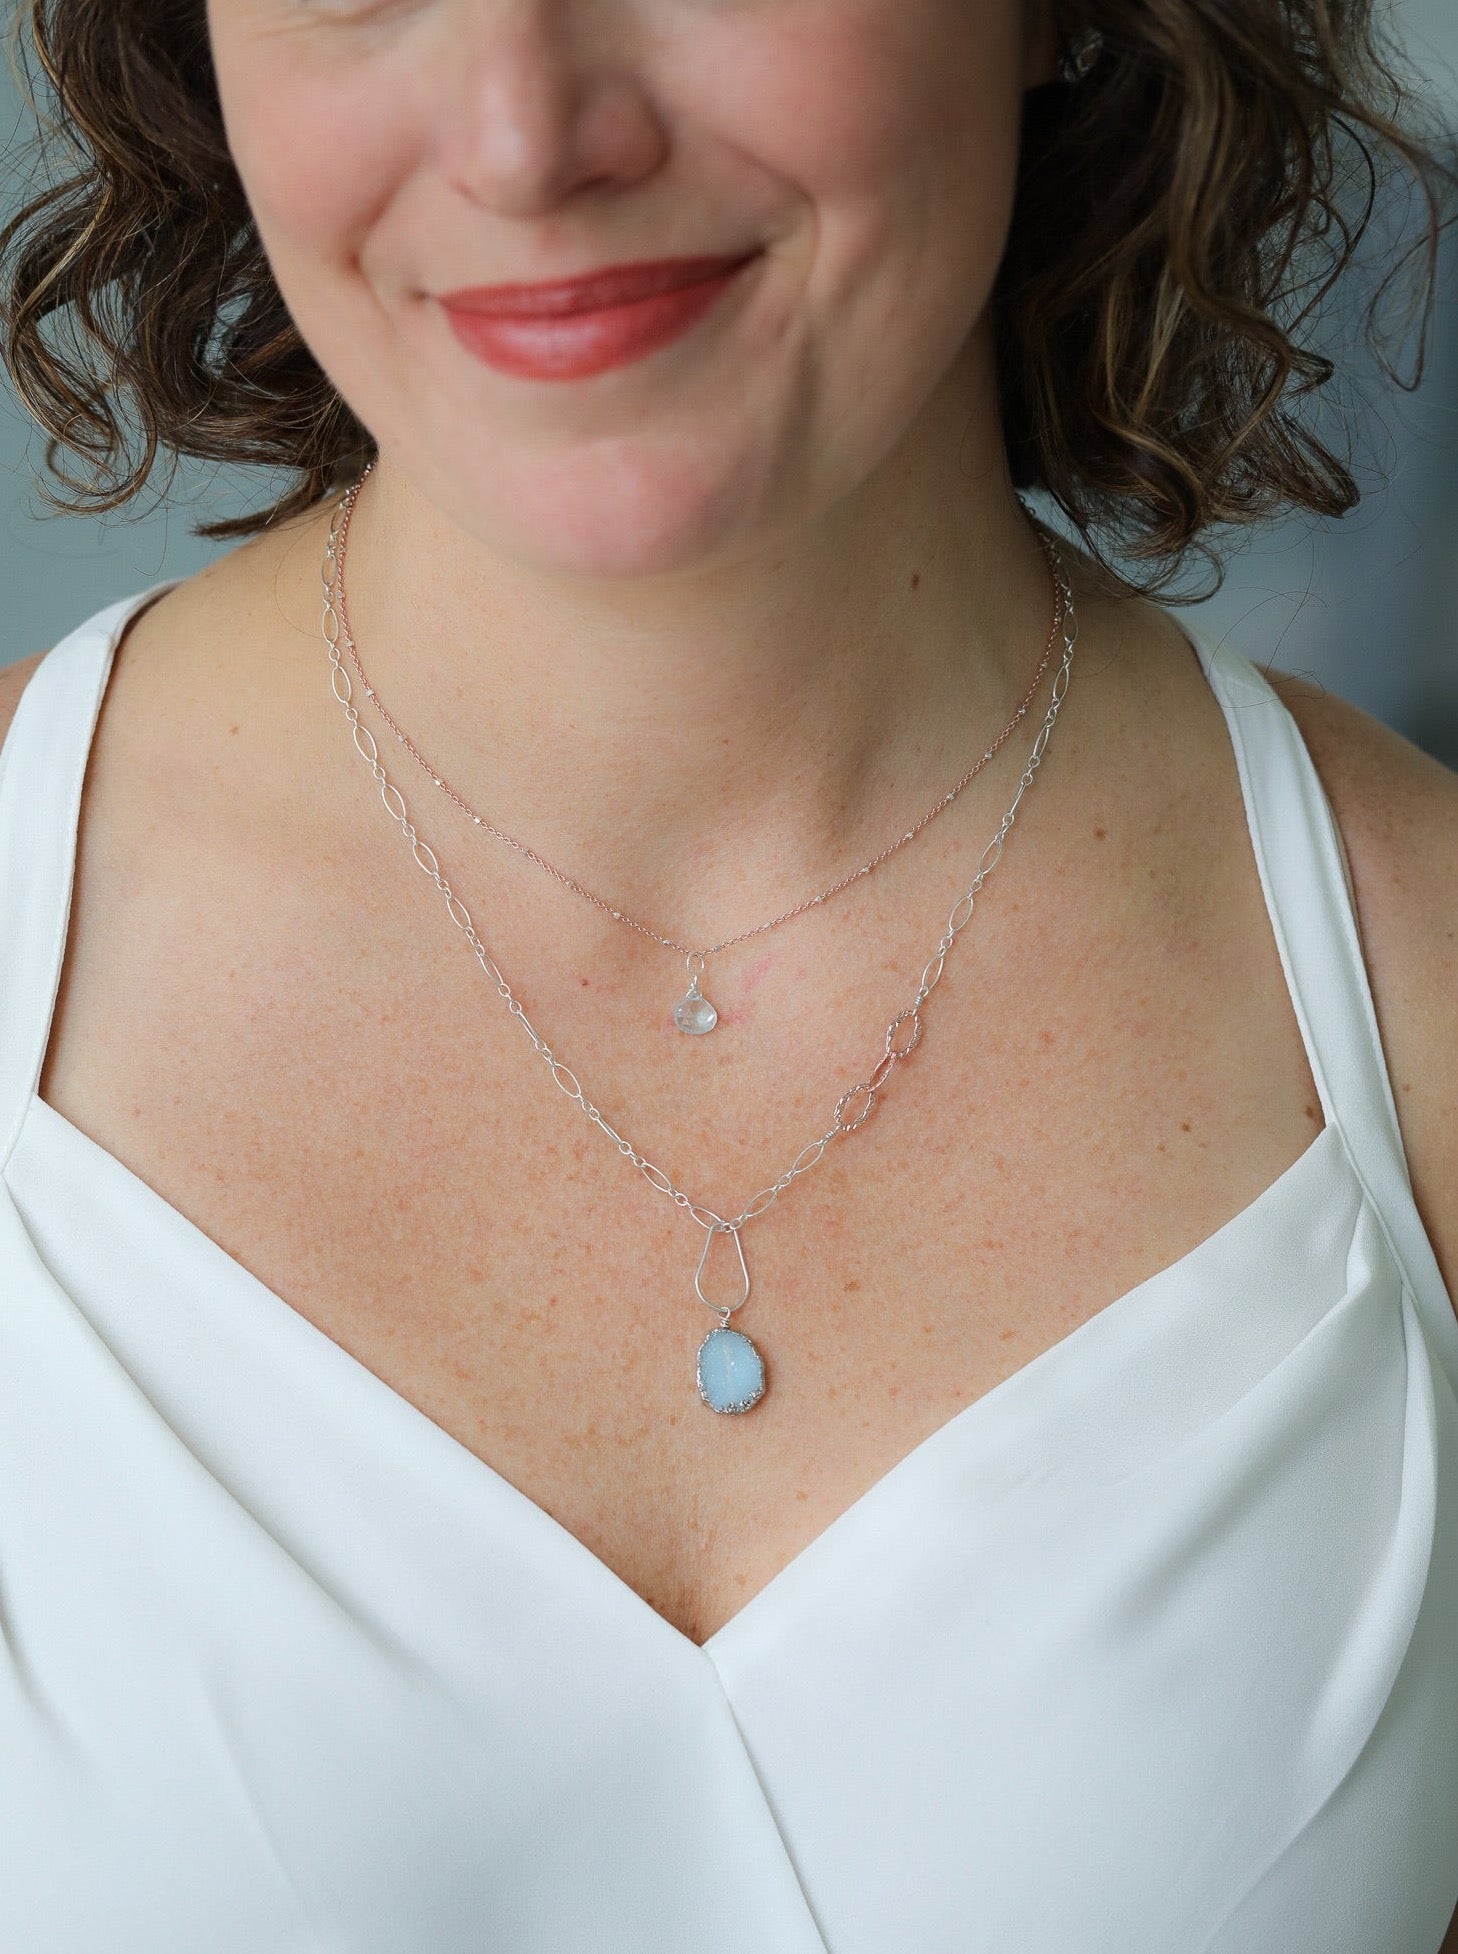 Serenity necklace shown layered 